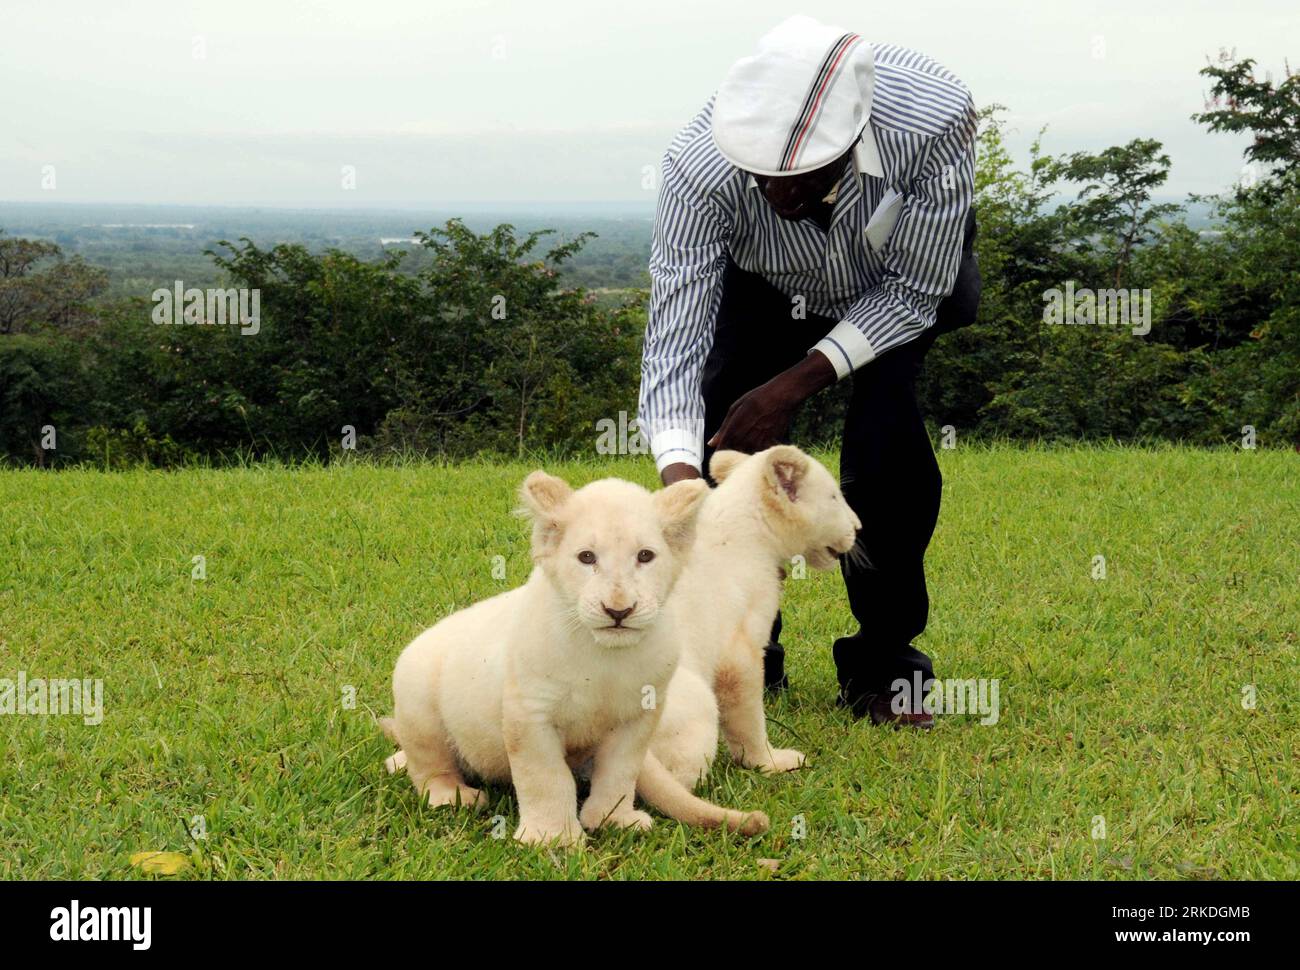 Bildnummer: 54946688  Datum: 22.02.2011  Copyright: imago/Xinhua (110224) -- LIVINGSTON, Feb. 24, 2011 (Xinhua) -- Two African white lion cub are seen at a wildlife reserve near Livingston, Zambia, Feb. 22, 2011. Two African white lion cubs were imported from South Africa on Feb. 21, and then were shown to visitors at the wildlife conservancy in Zambia.(Xinhua/Meng Jing) (axy) ZAMBIA-AFRICAN WHITE LION PUBLICATIONxNOTxINxCHN Gesellschaft Tiere Löwe weisser Löwenbaby Jungtier kbdig xdp premiumd 2011 quer     Bildnummer 54946688 Date 22 02 2011 Copyright Imago XINHUA  Livingston Feb 24 2011 XINH Stock Photo